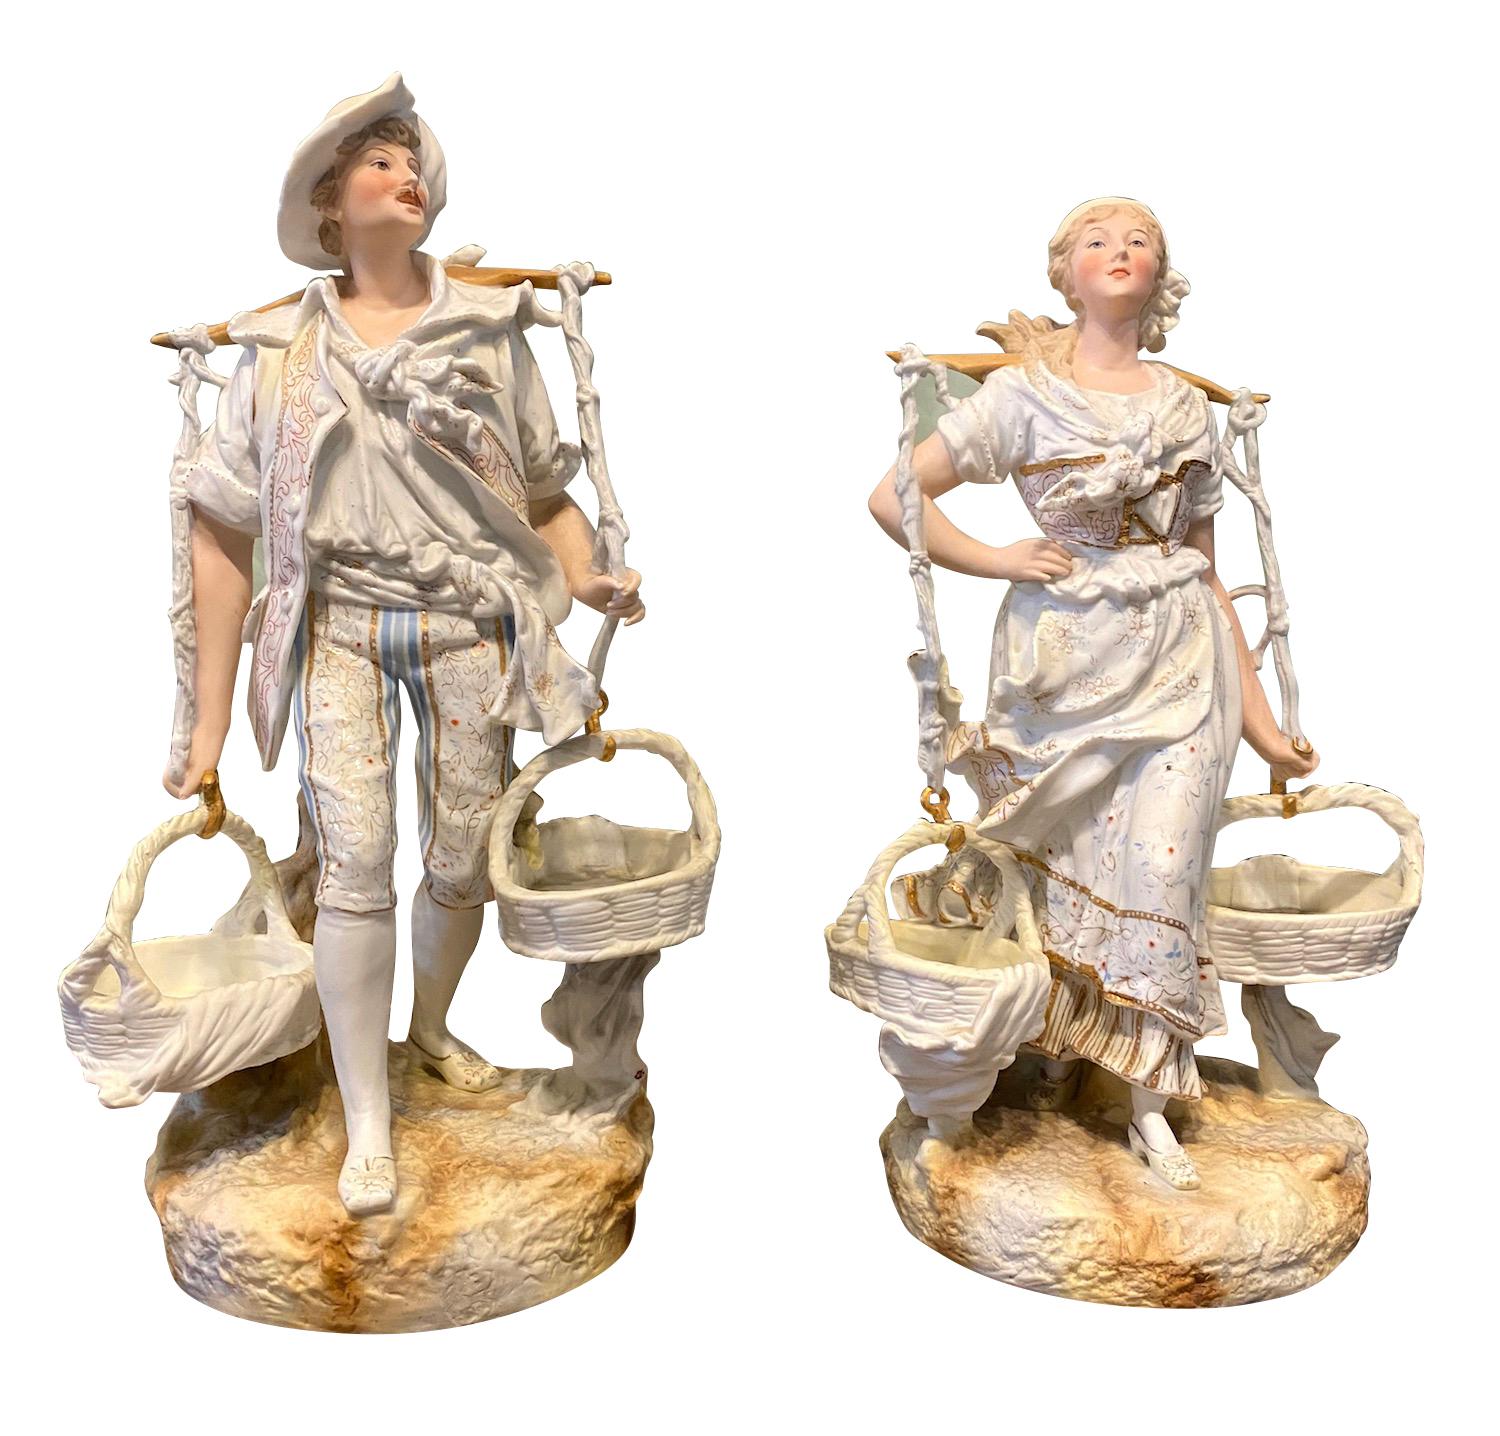 Pair of French Bisque Porcelain Hand Painted Figural Sculptures, Circa 1900
Depicting male and female fruit pickers 